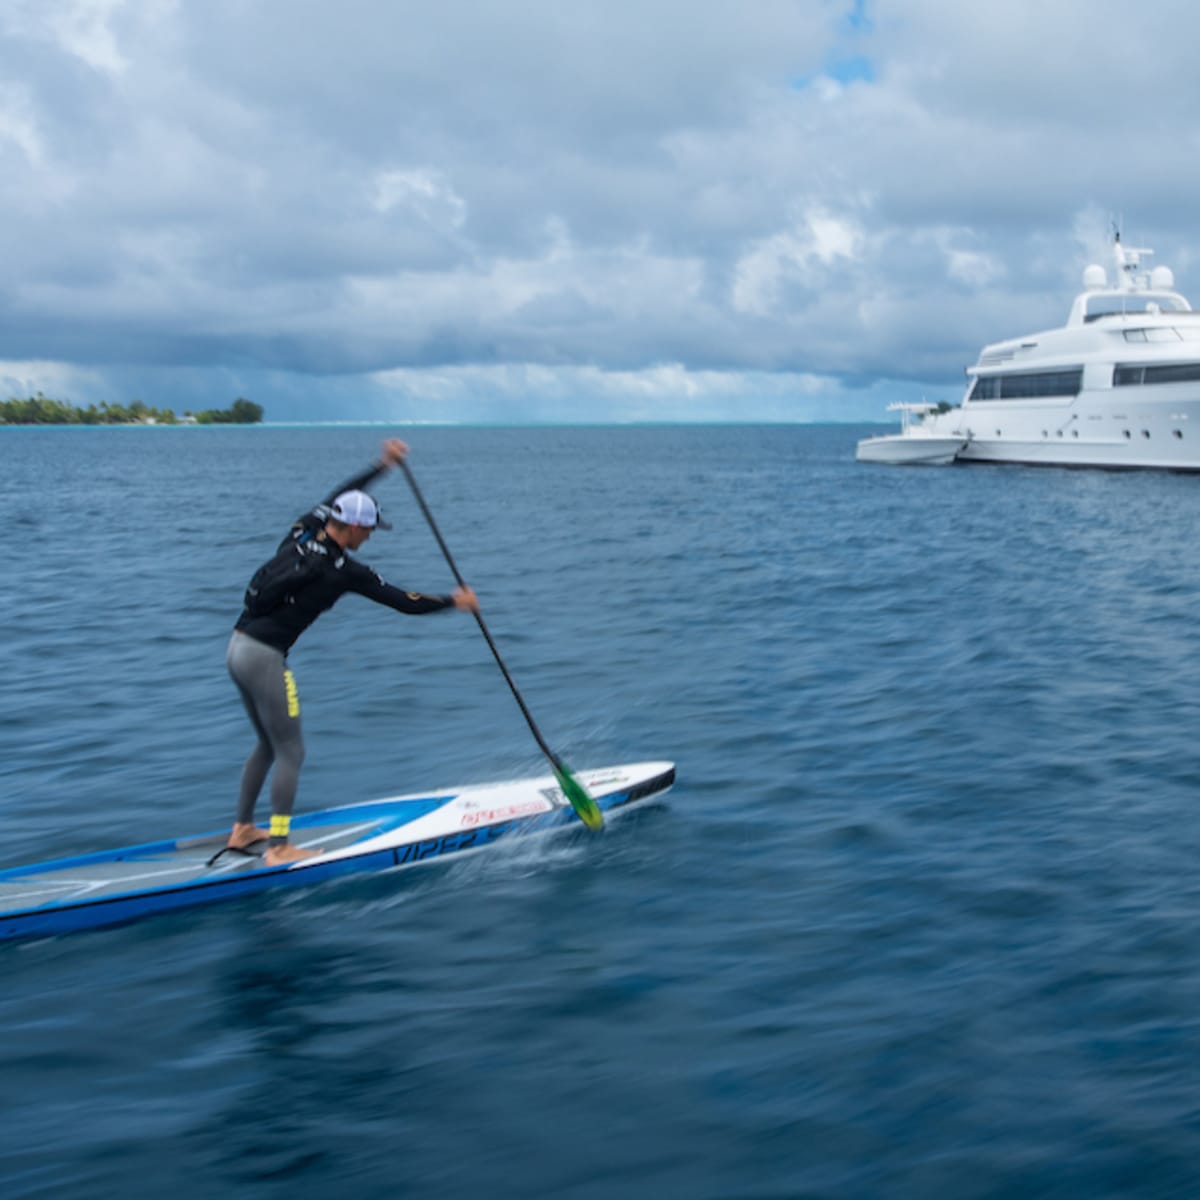 How to Master 'The Catch' on Your Stand up Paddle Board Stroke